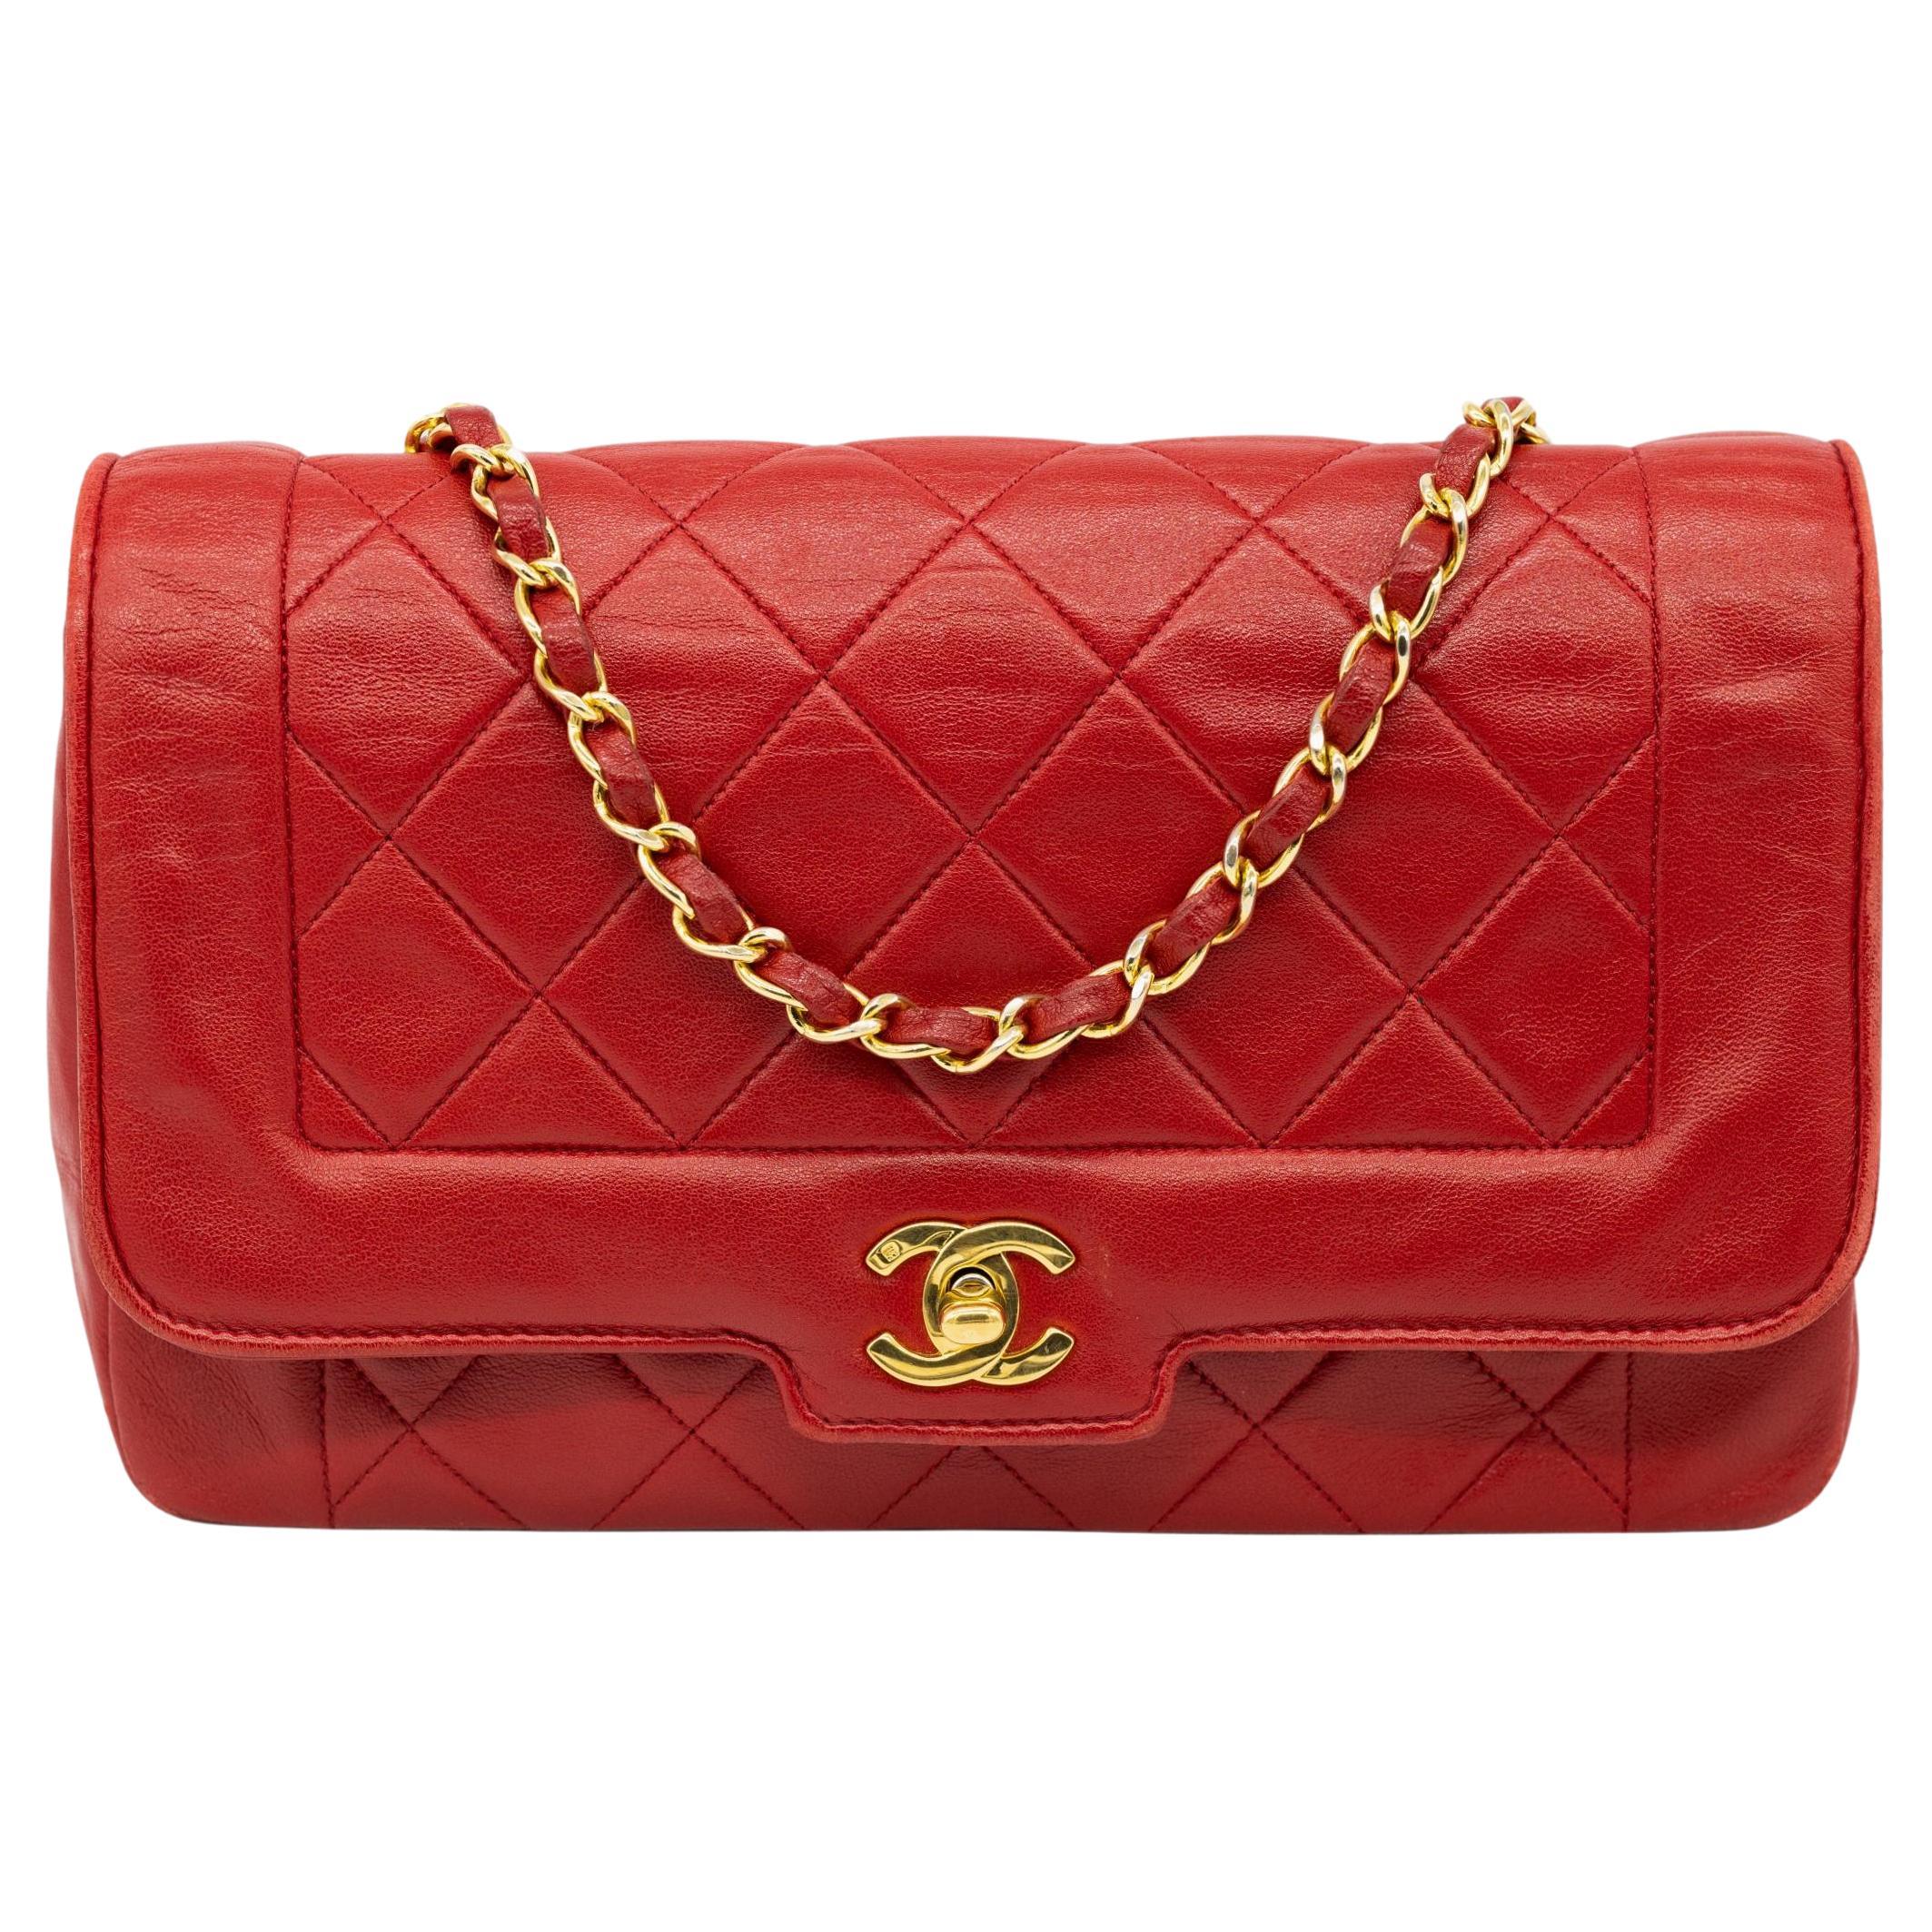 Chanel Diana Quilted Red Lambskin Flap Mademoiselle Chain Shoulder Bag, 1989.